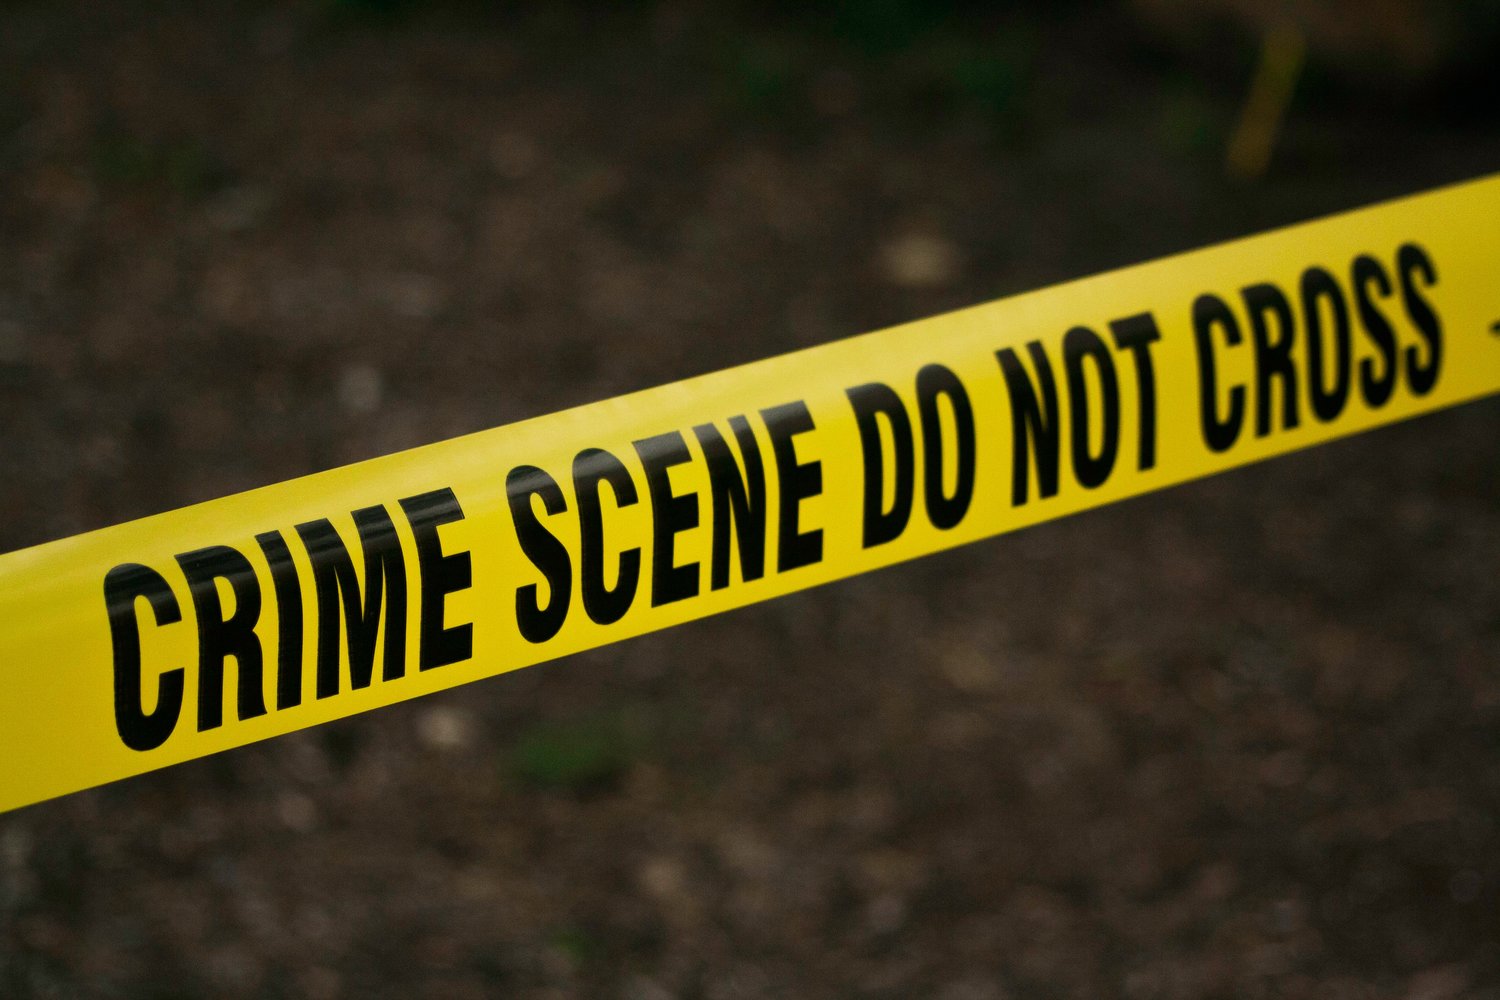 A man has died and his son has been injured after an unknown assailant or assailants fired into his apartment, striking him three times and his five-year-old son once.